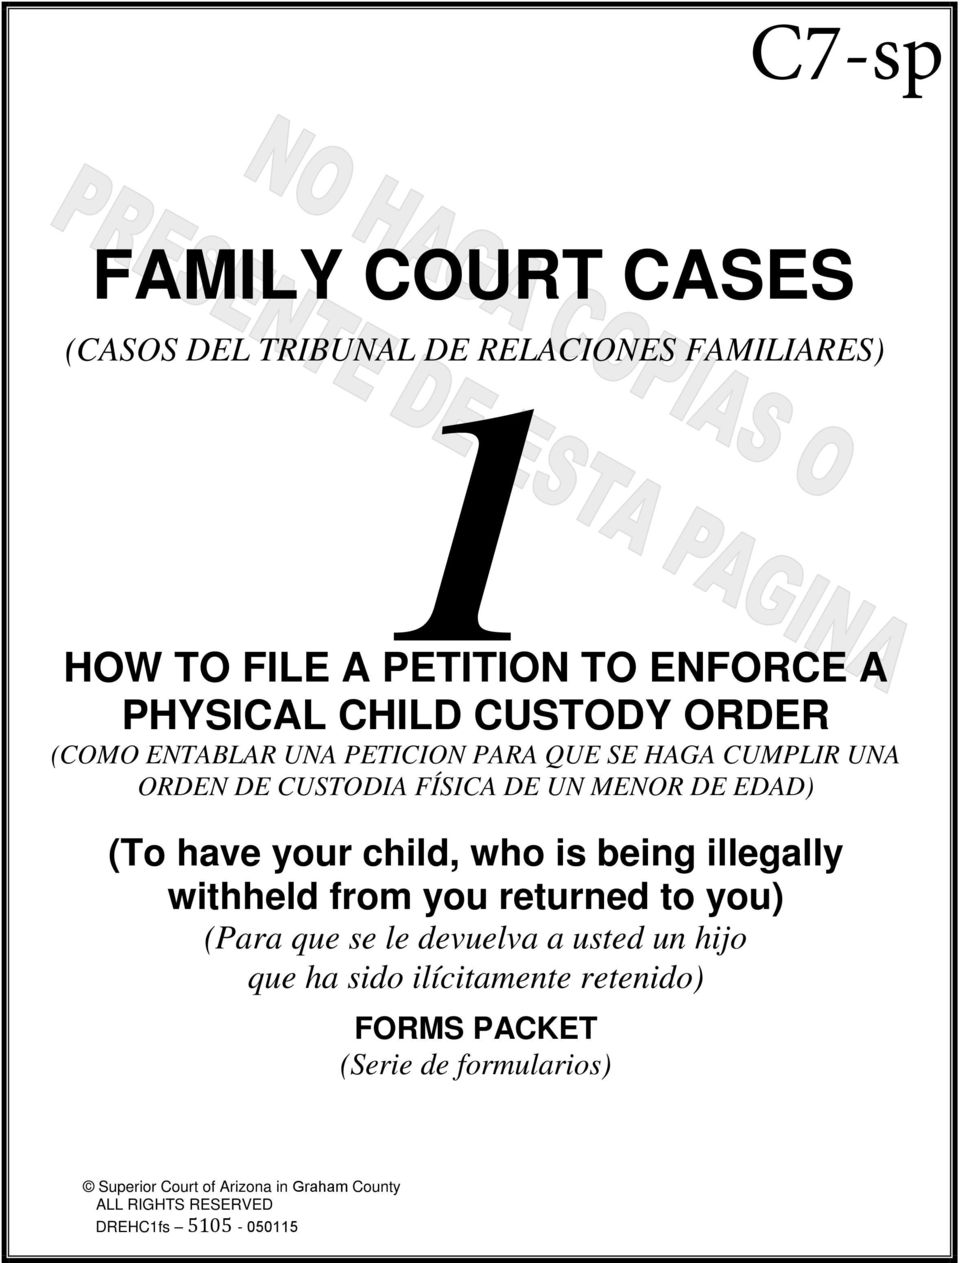 have your child, who is being illegally withheld from you returned to you) (Para que se le devuelva a usted un hijo que ha